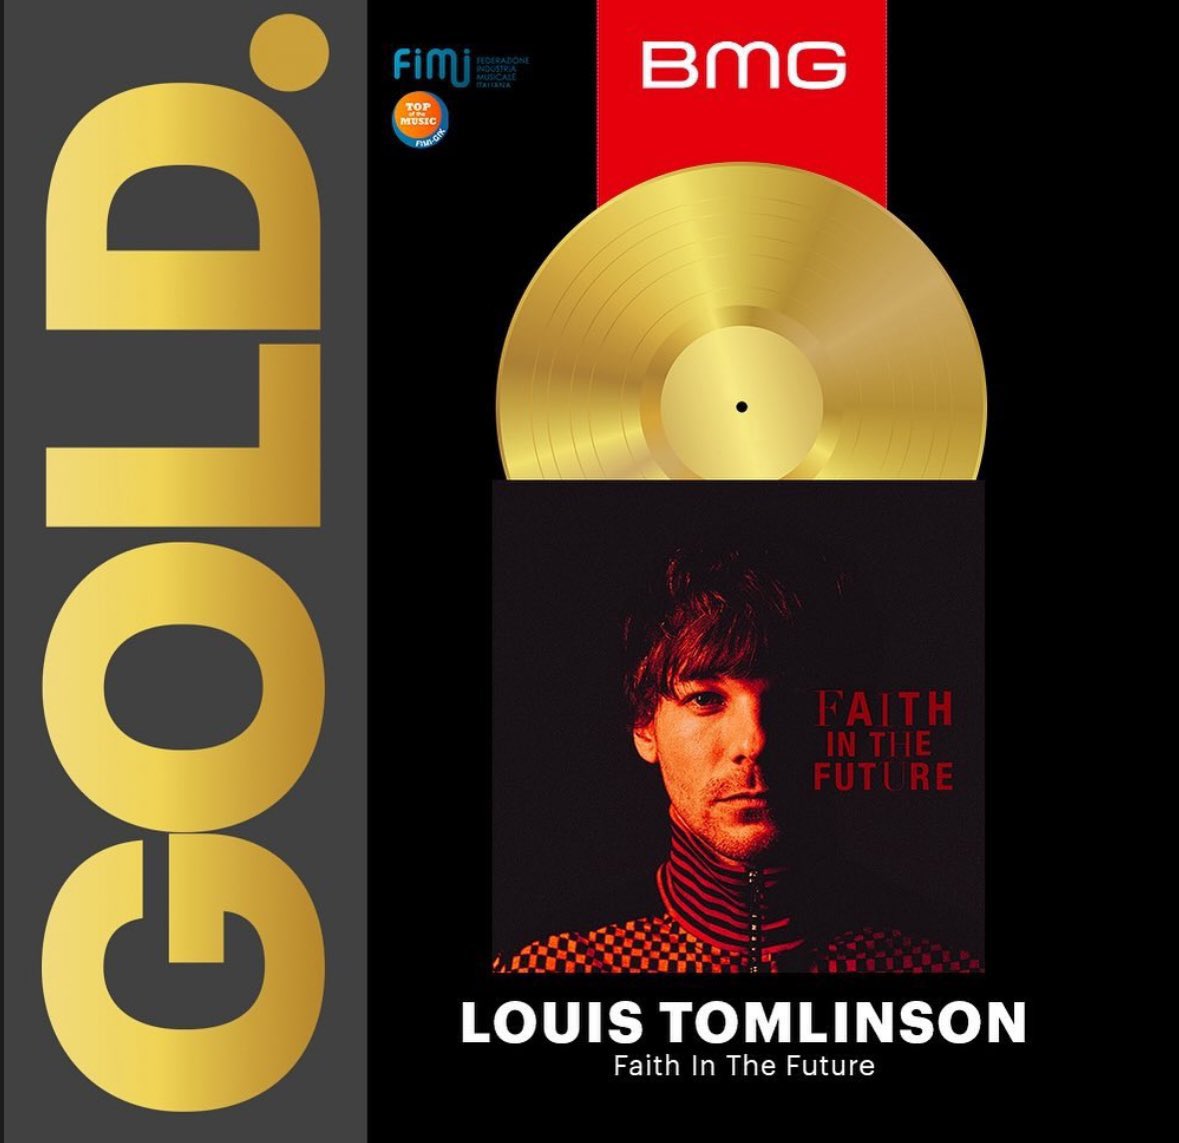 Faith In The Future is now certified Gold in Italy! 💿 Congratulations @Louis_Tomlinson ❤️